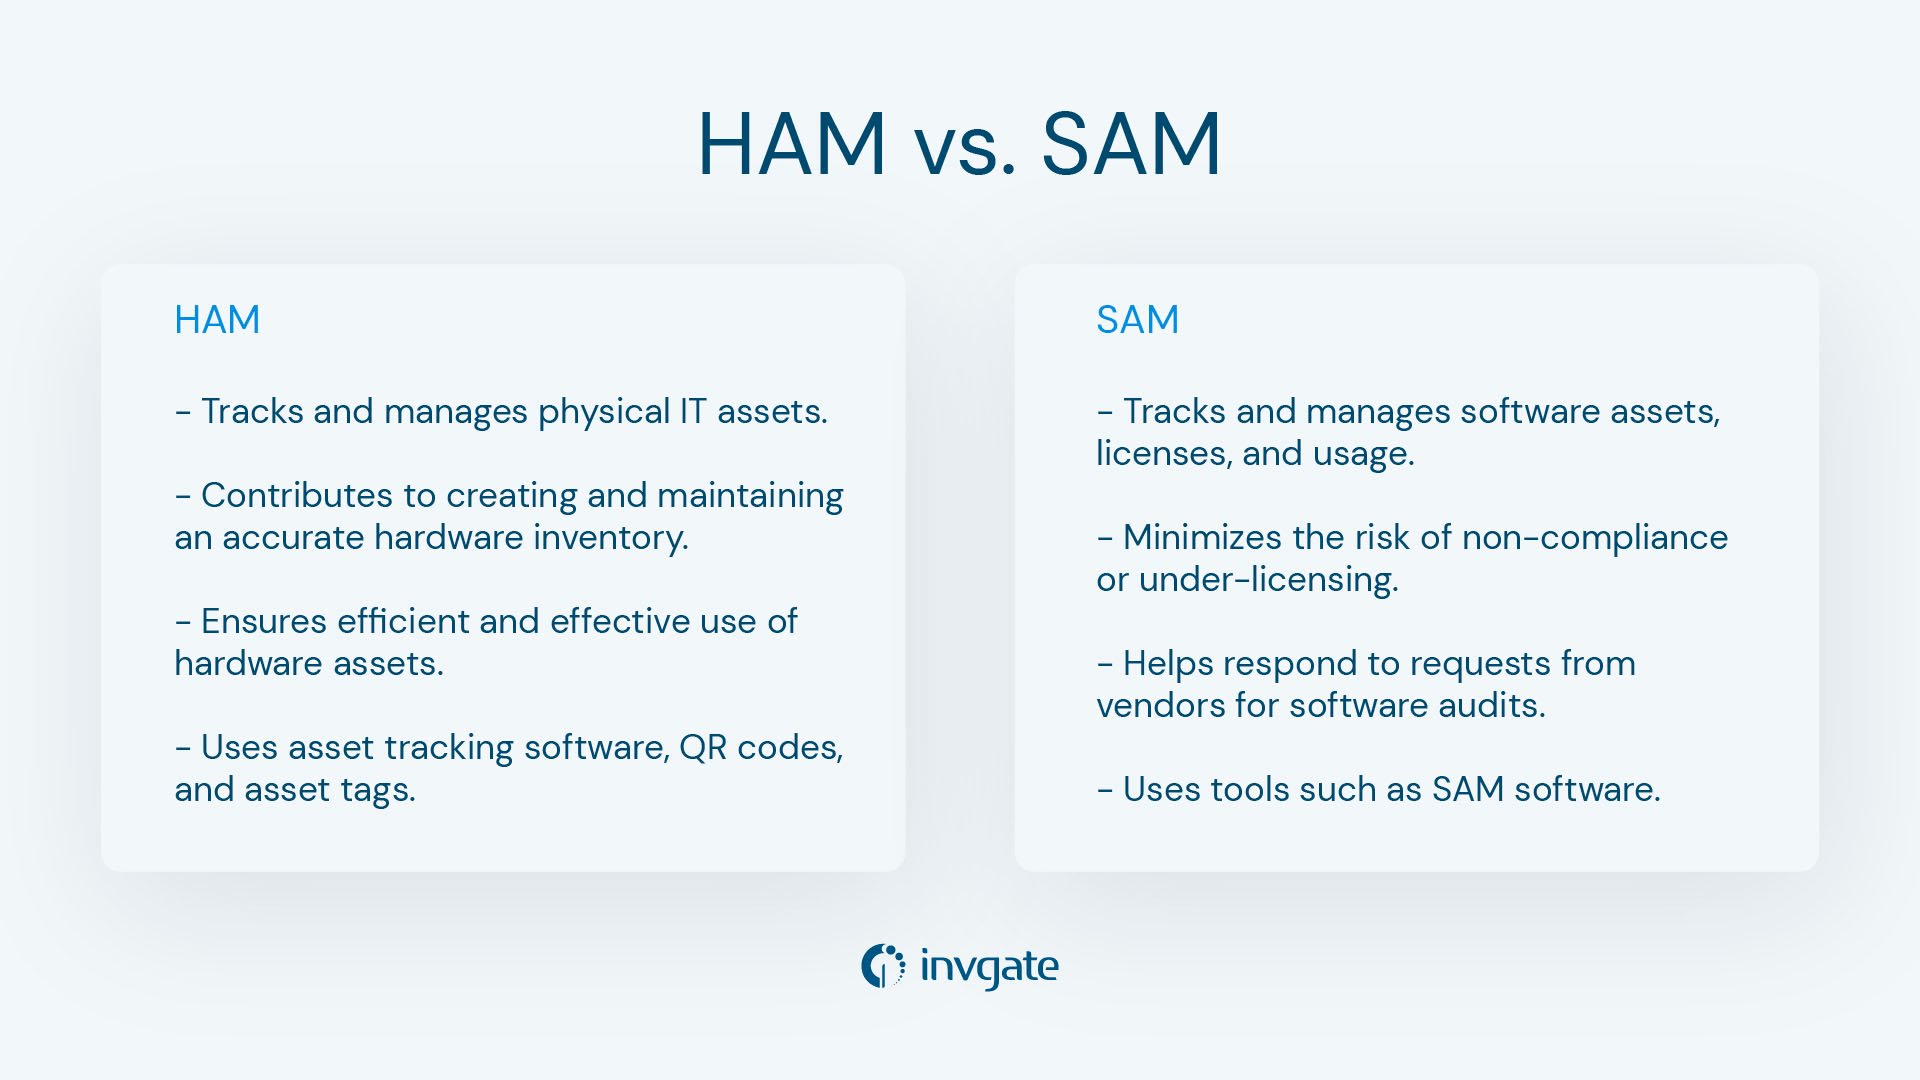 Comparative chart summarizing the differences between HAM and SAM.